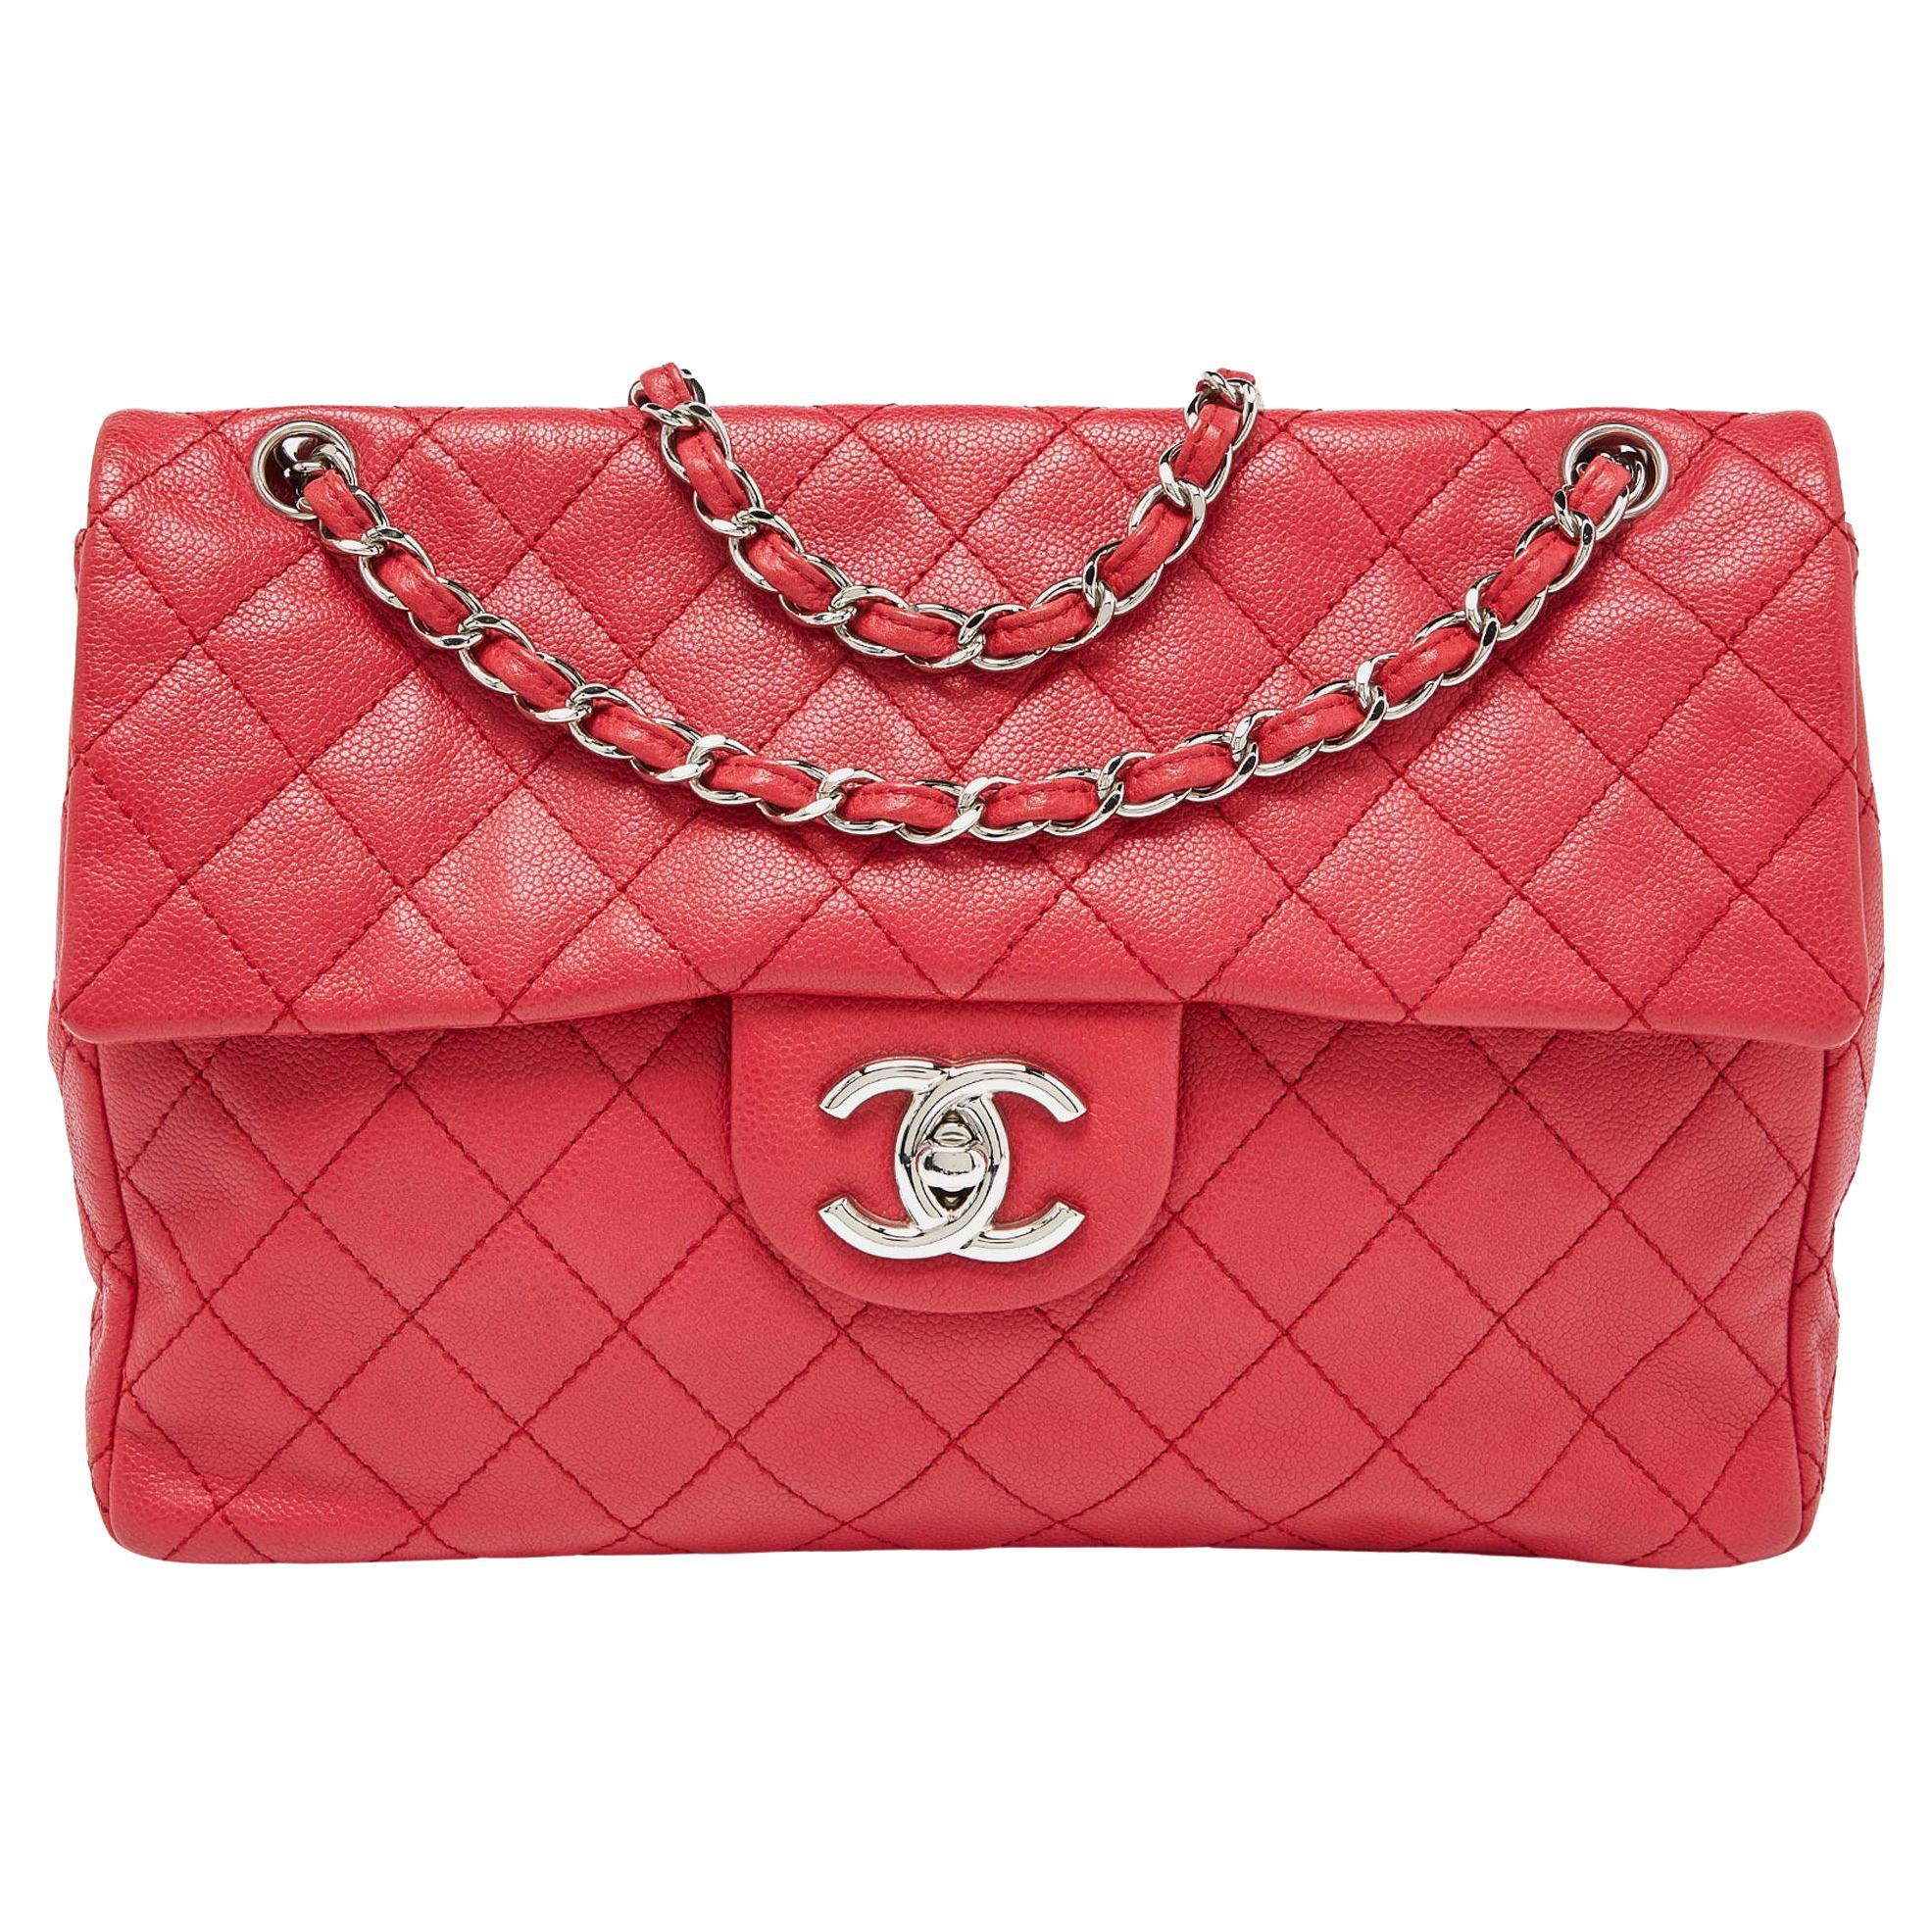 Chanel Red Quilted Caviar Leather Maxi Classic Single Flap Bag